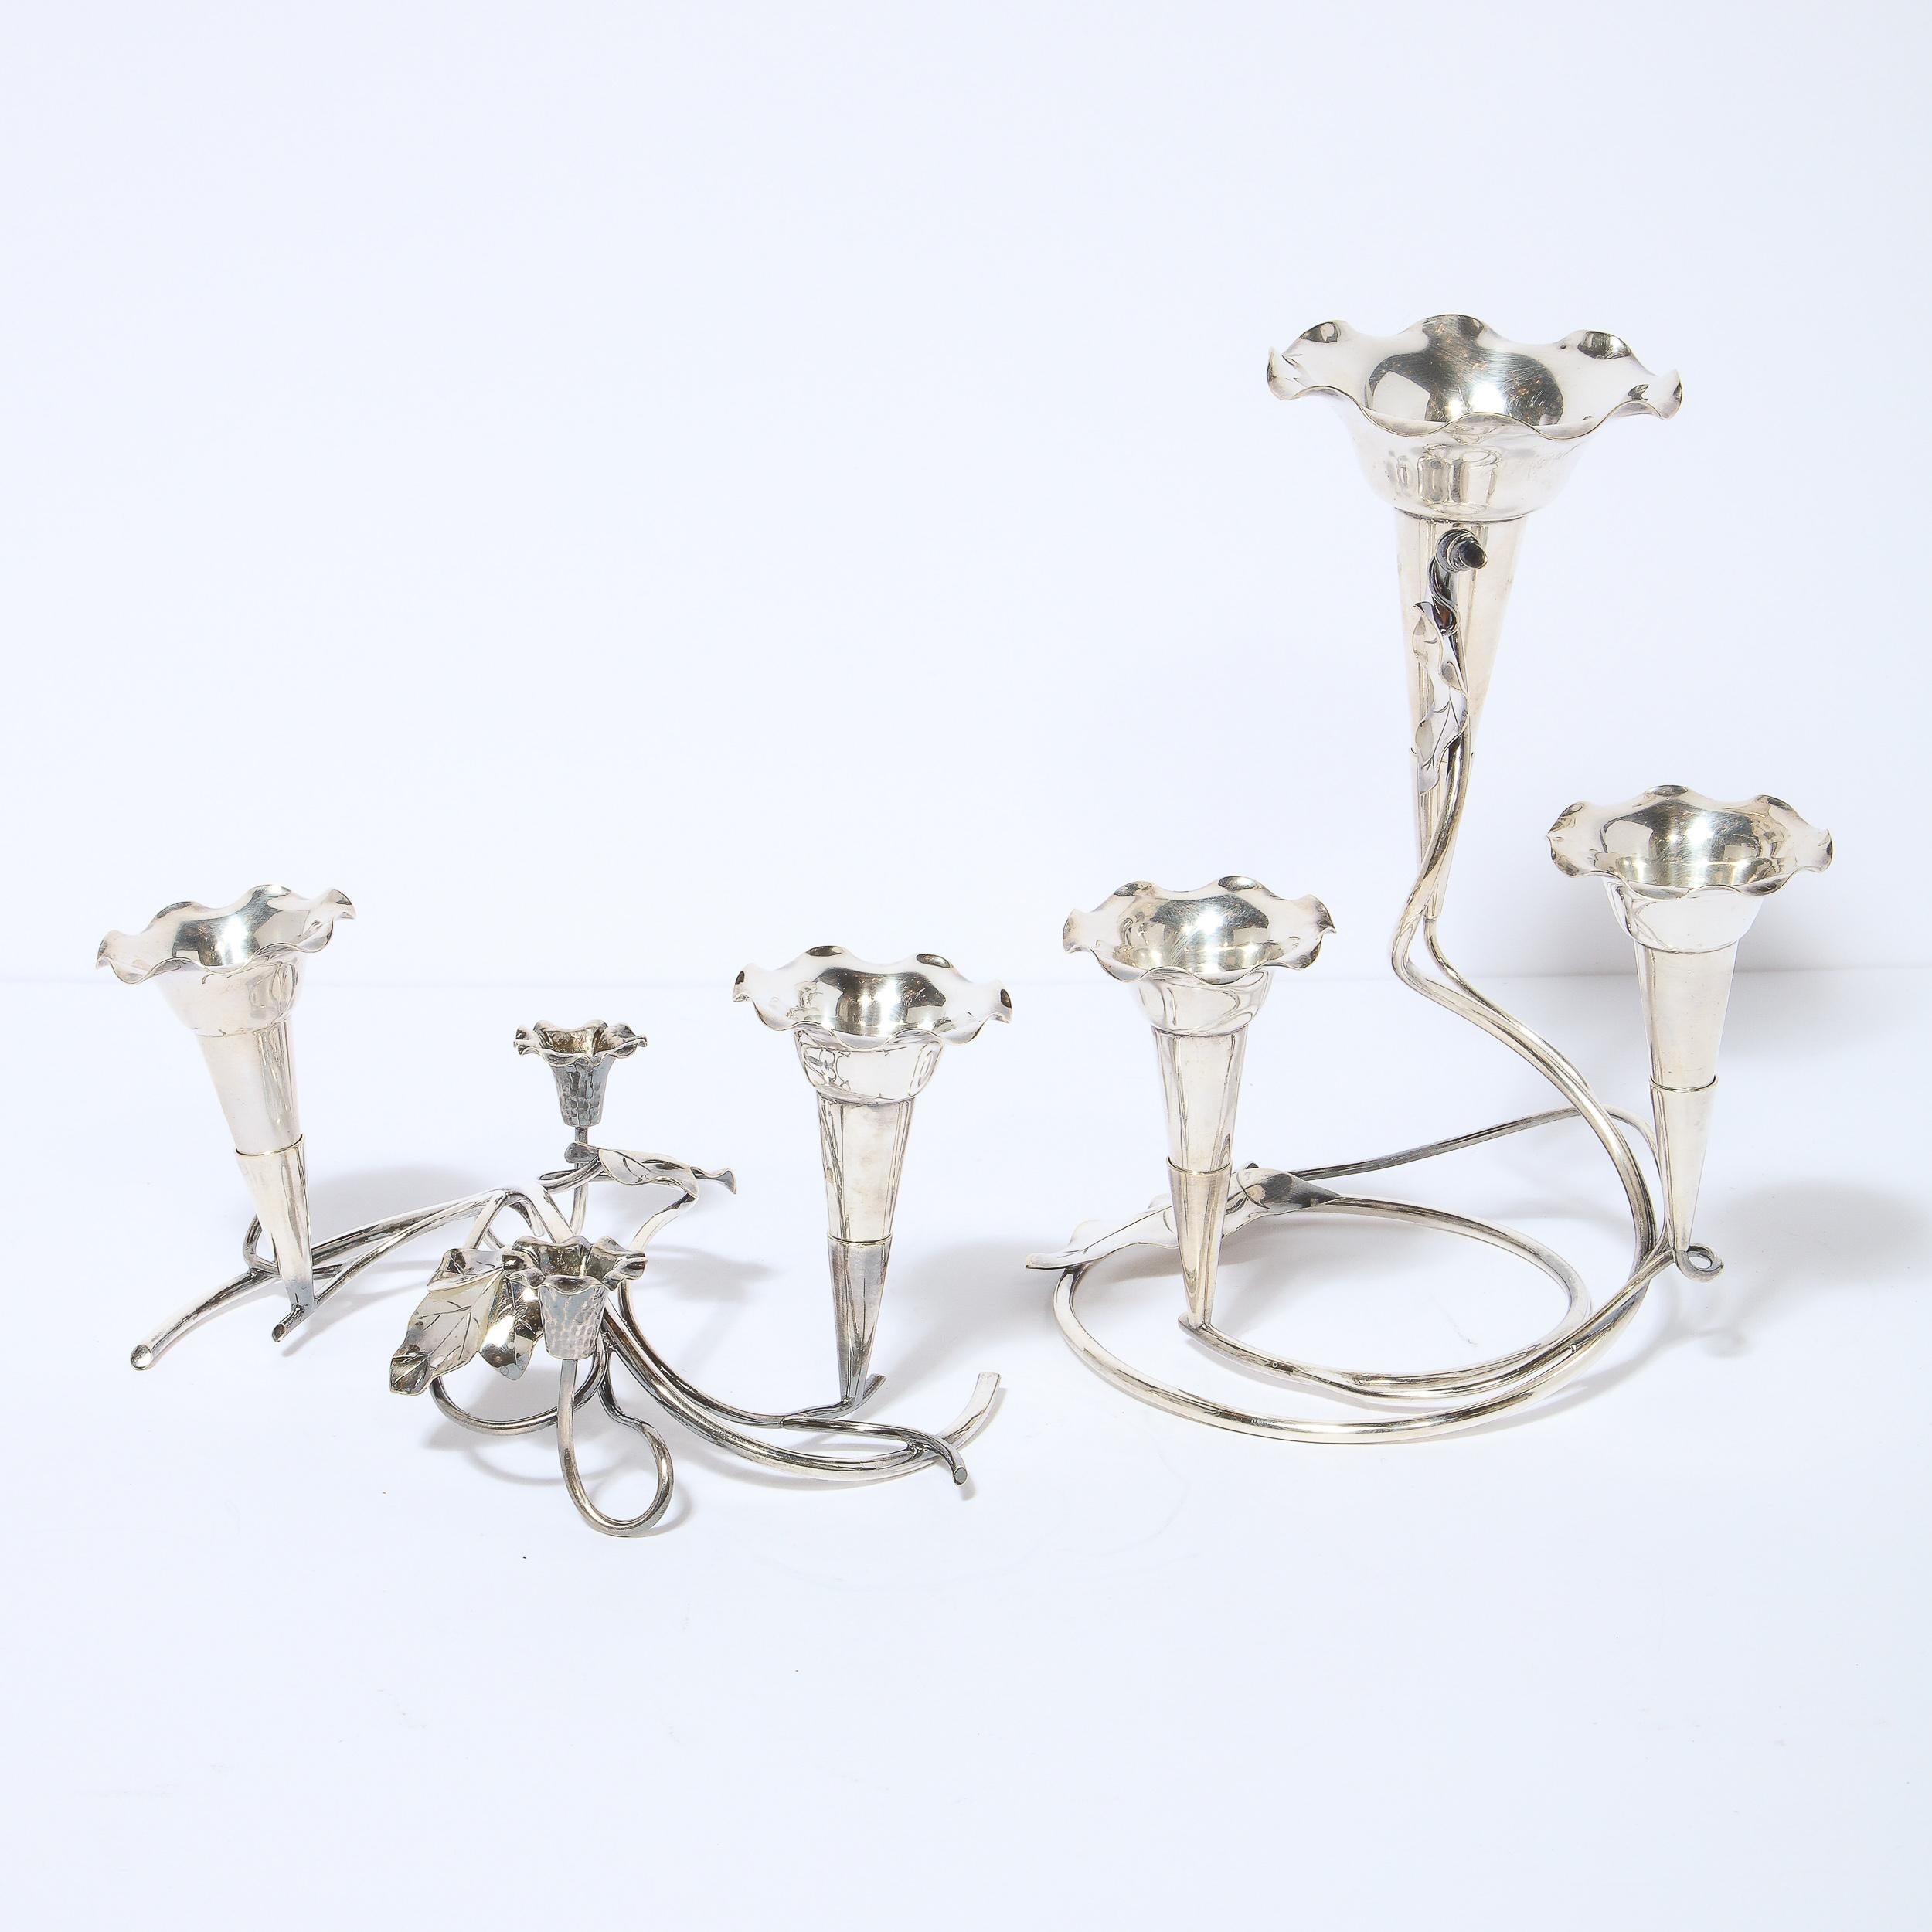 Pair of Art Nouveau Morning Glory Silver Plated Candelabras For Sale 2